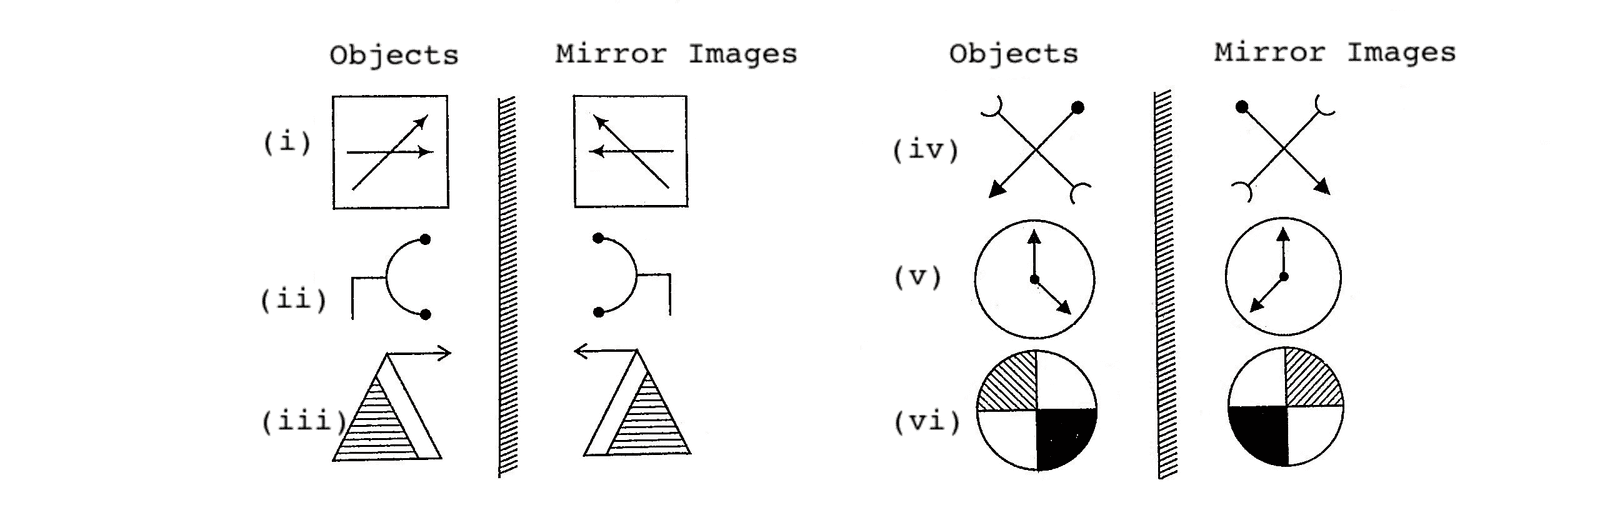 mirror-images-non-verbal-reasoning-introduction---mirror-images-problems